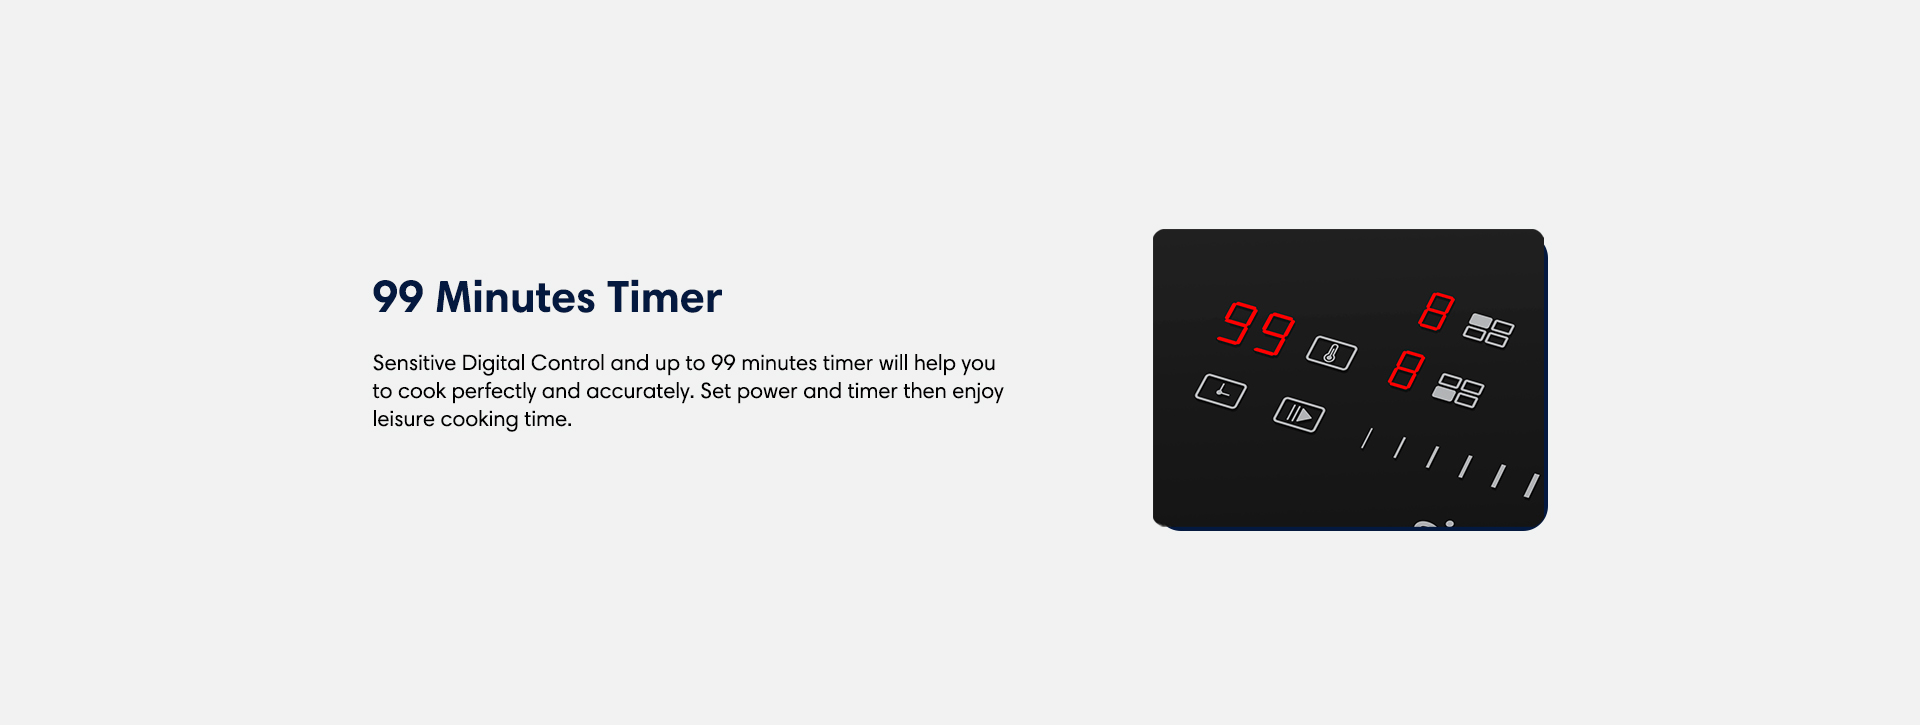 99 mintutes timer sensitive digital control and up to 99 minuted timer will help you to cook perfectly and accurately. Set power and timer then enjoy leisure cooking time.